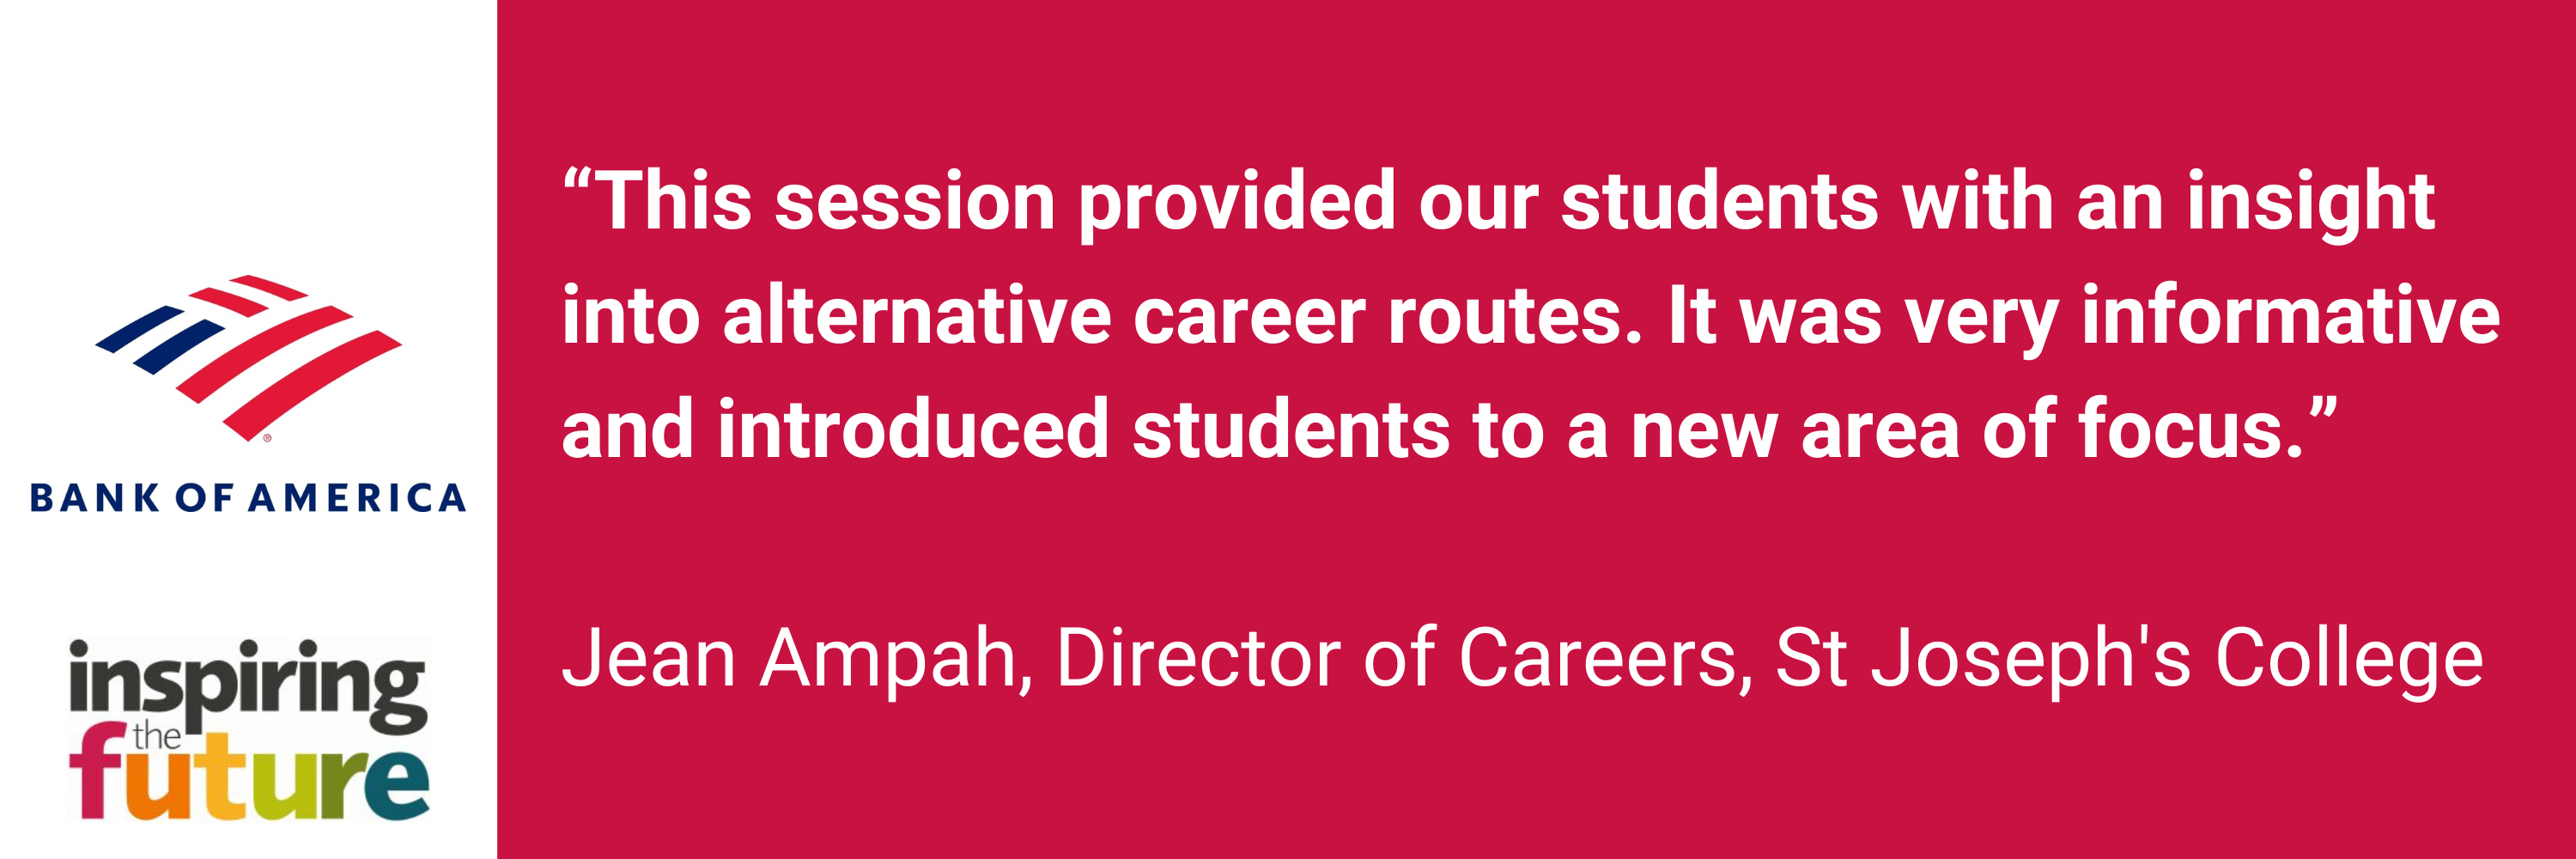 “This session provided our students with an insight into alternative career routes. It was very informative and introduced students to a new area of focus.” Jean Ampah, Director of Careers, St Joseph's College